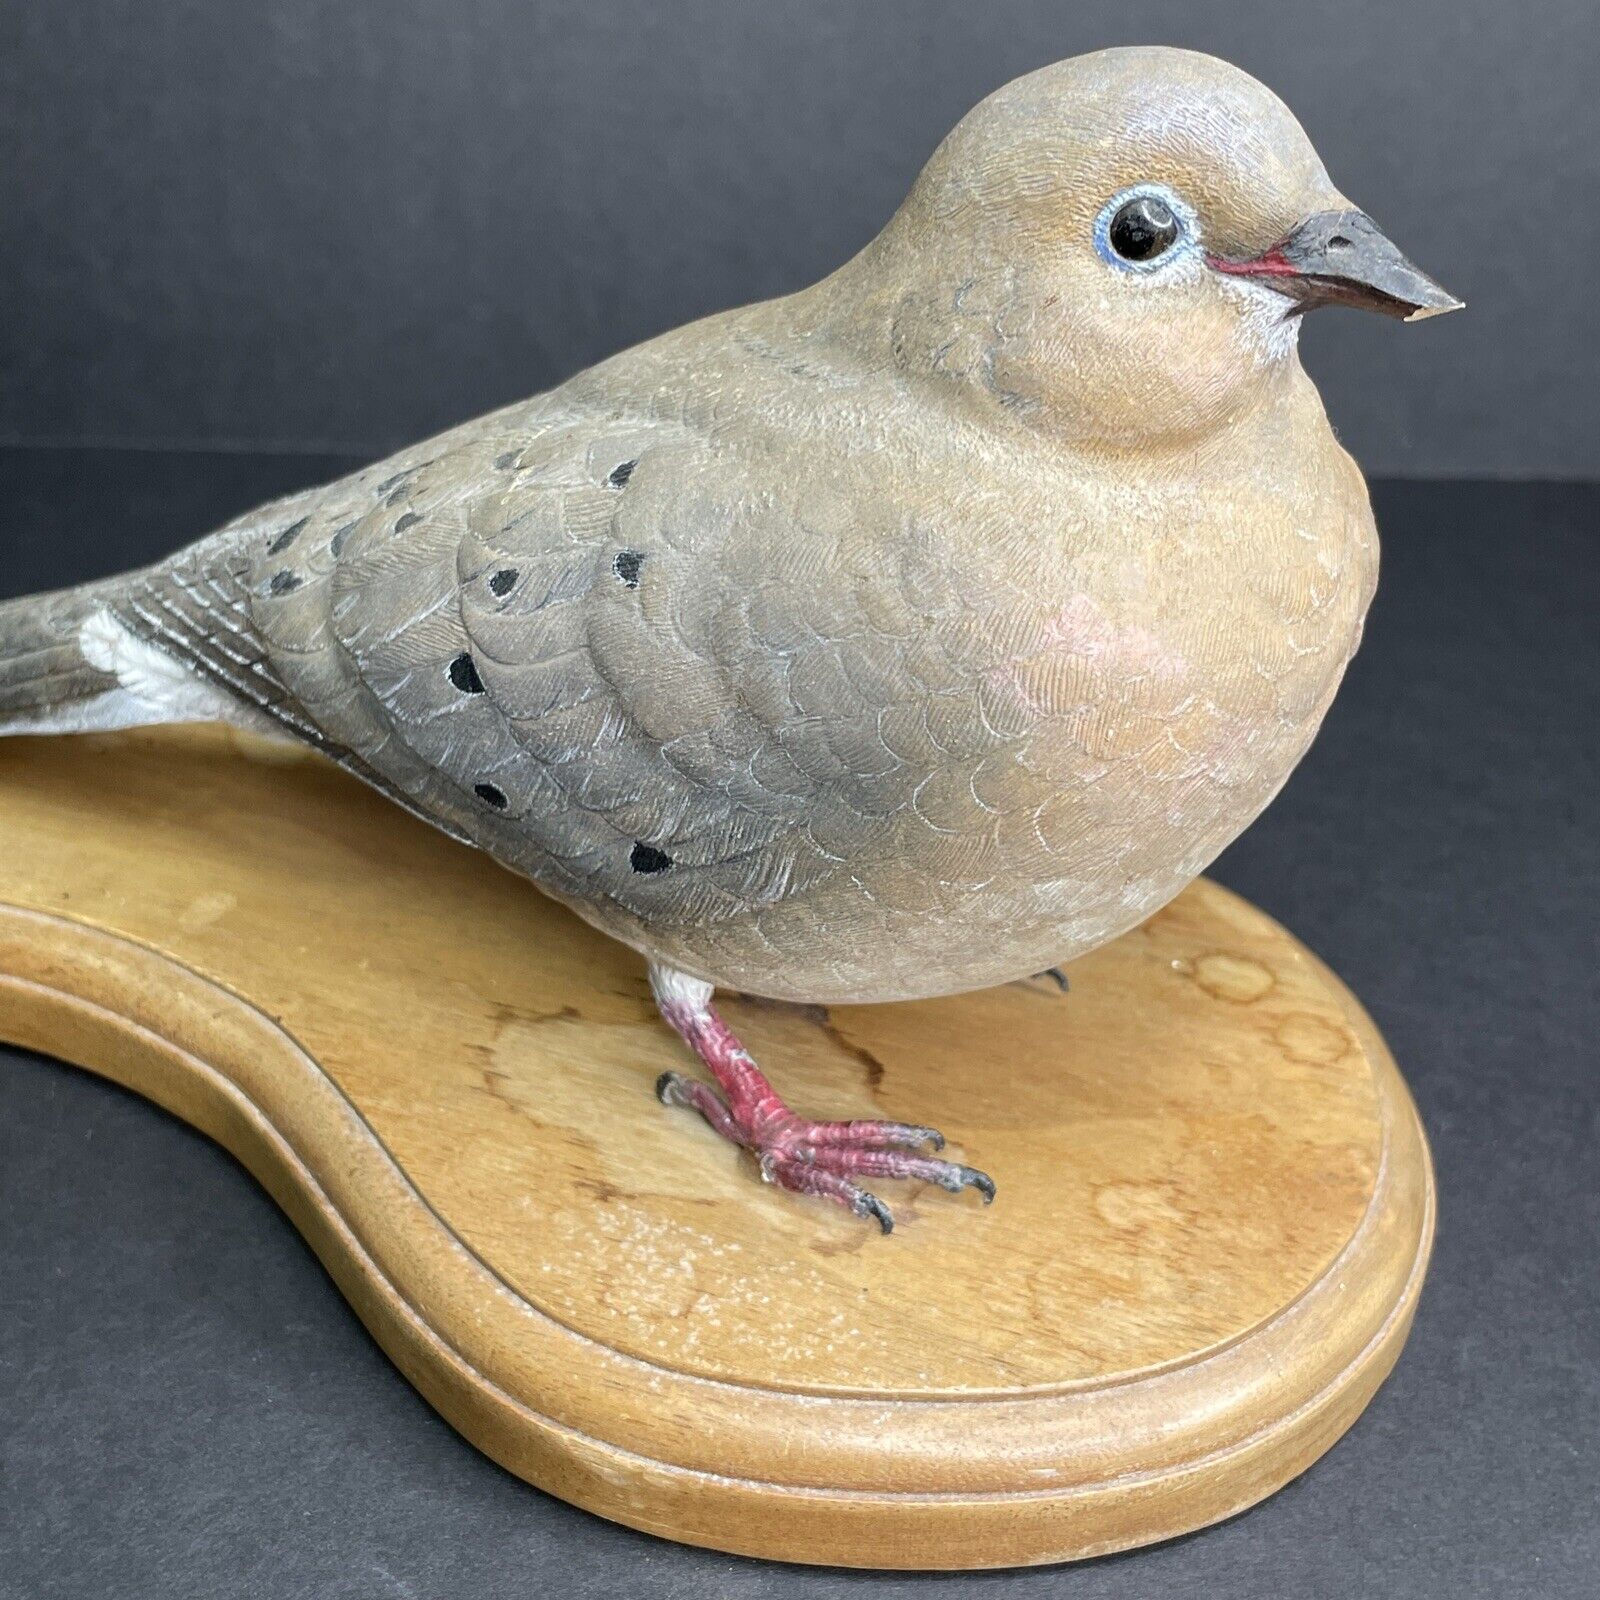 1984 Hand-Carved Hand-Painted Mourning Dove Solid Wood Bird Decoy Peter Willis